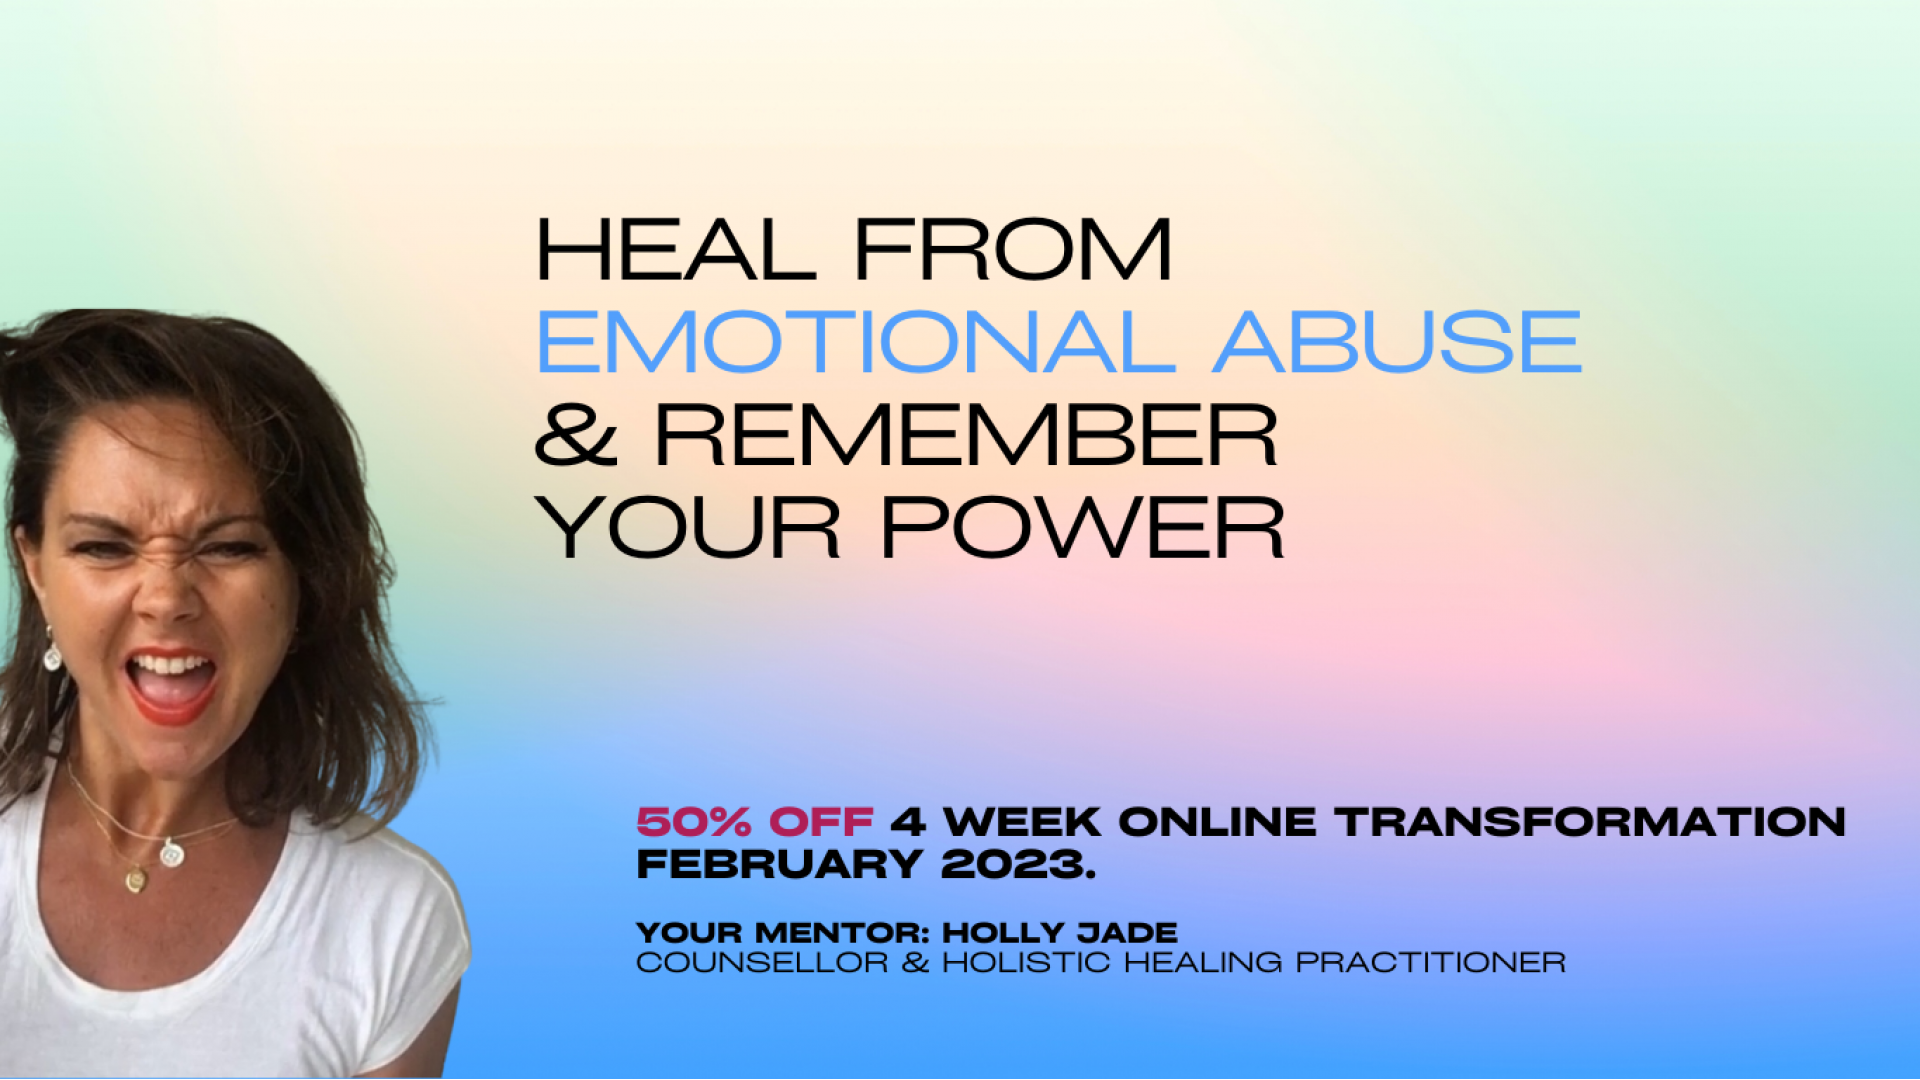 Heal from emotional abuse and remember your power